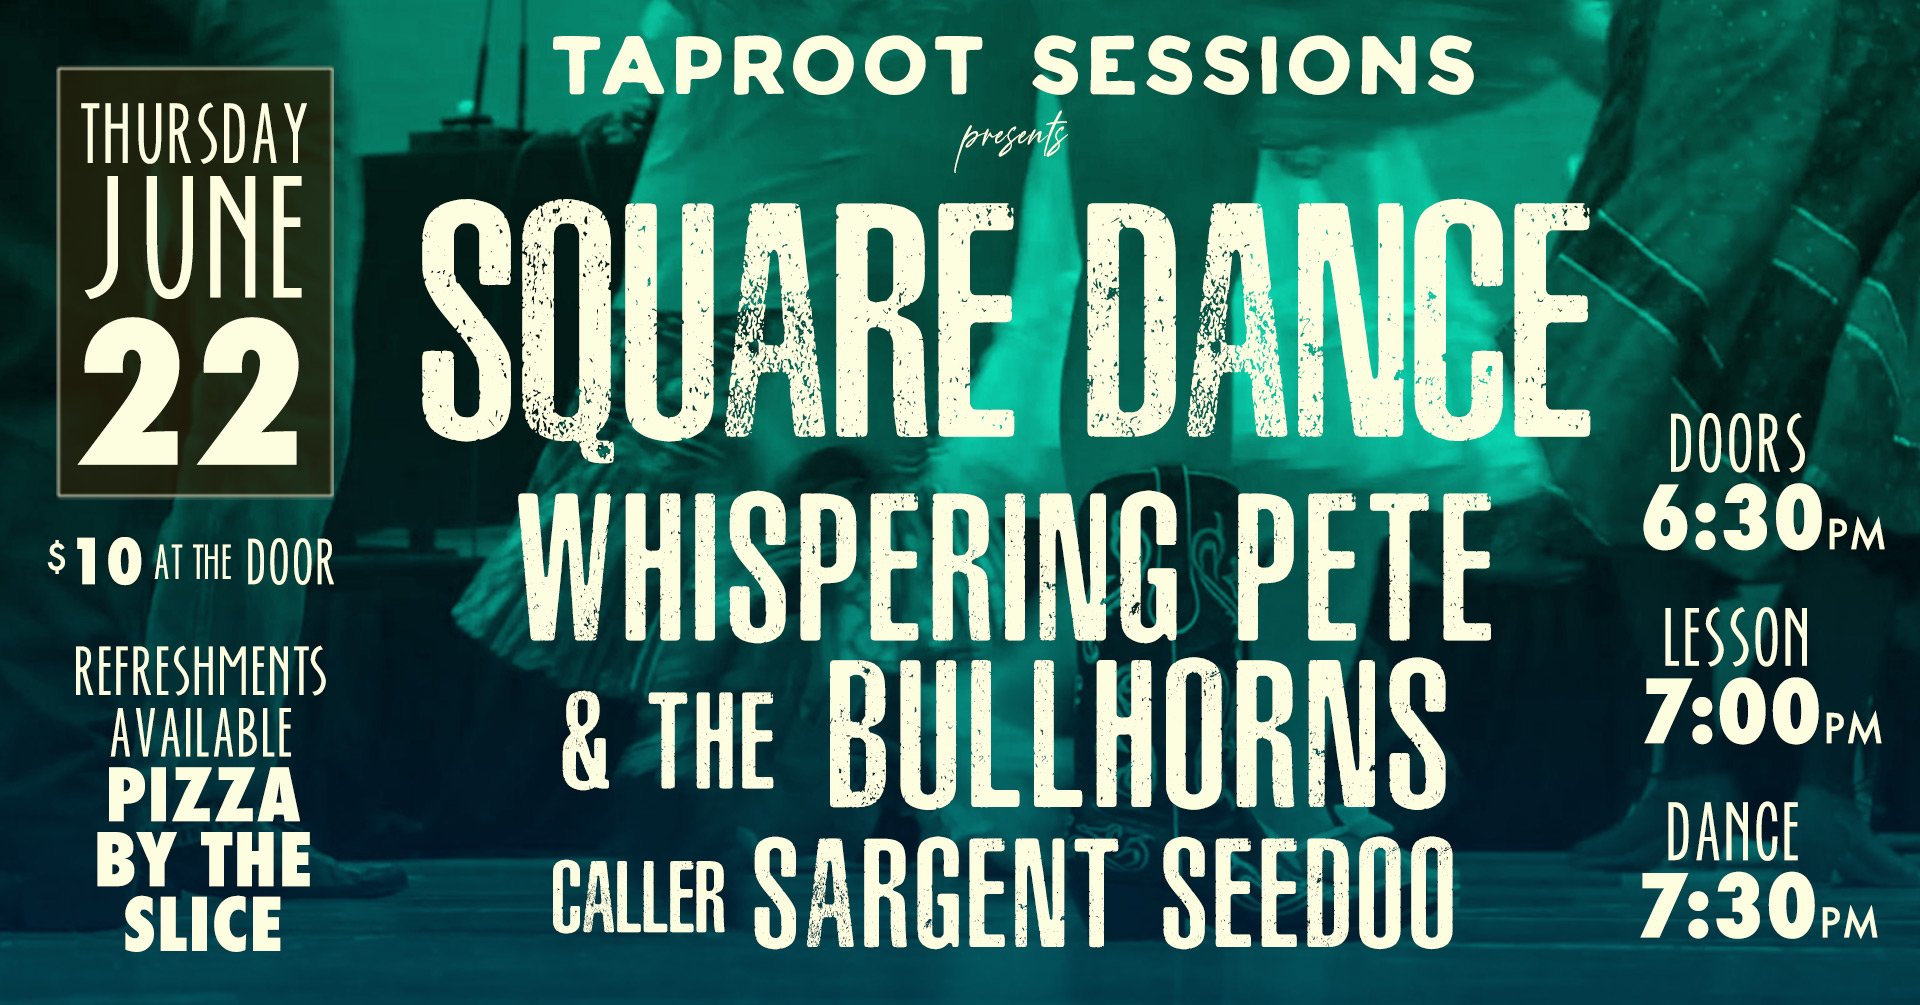 Taproot Sessions Square Dance